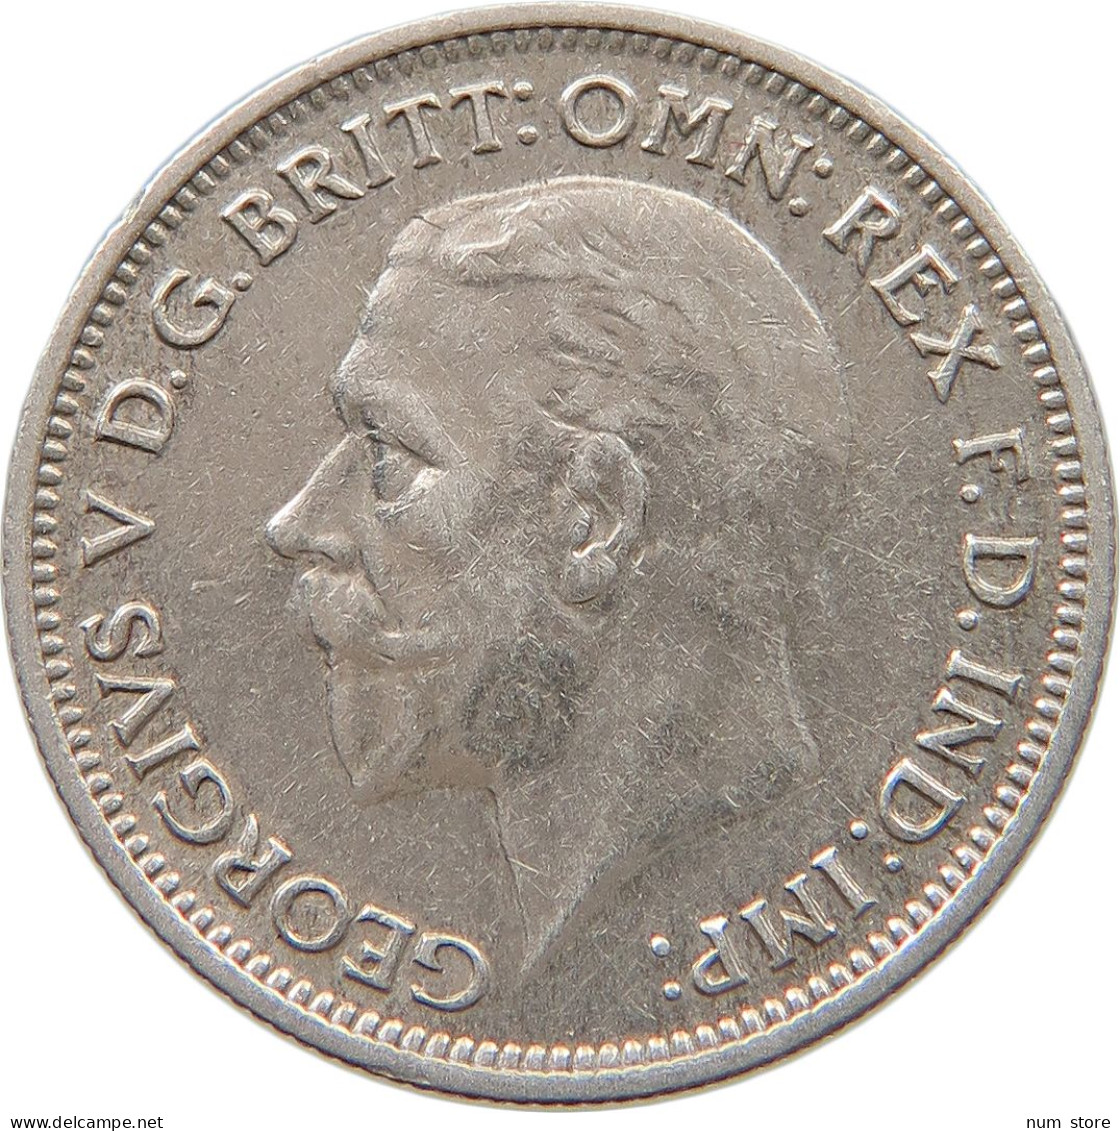 GREAT BRITAIN SIXPENCE 1936 George V. (1910-1936) #t115 0407 - H. 6 Pence